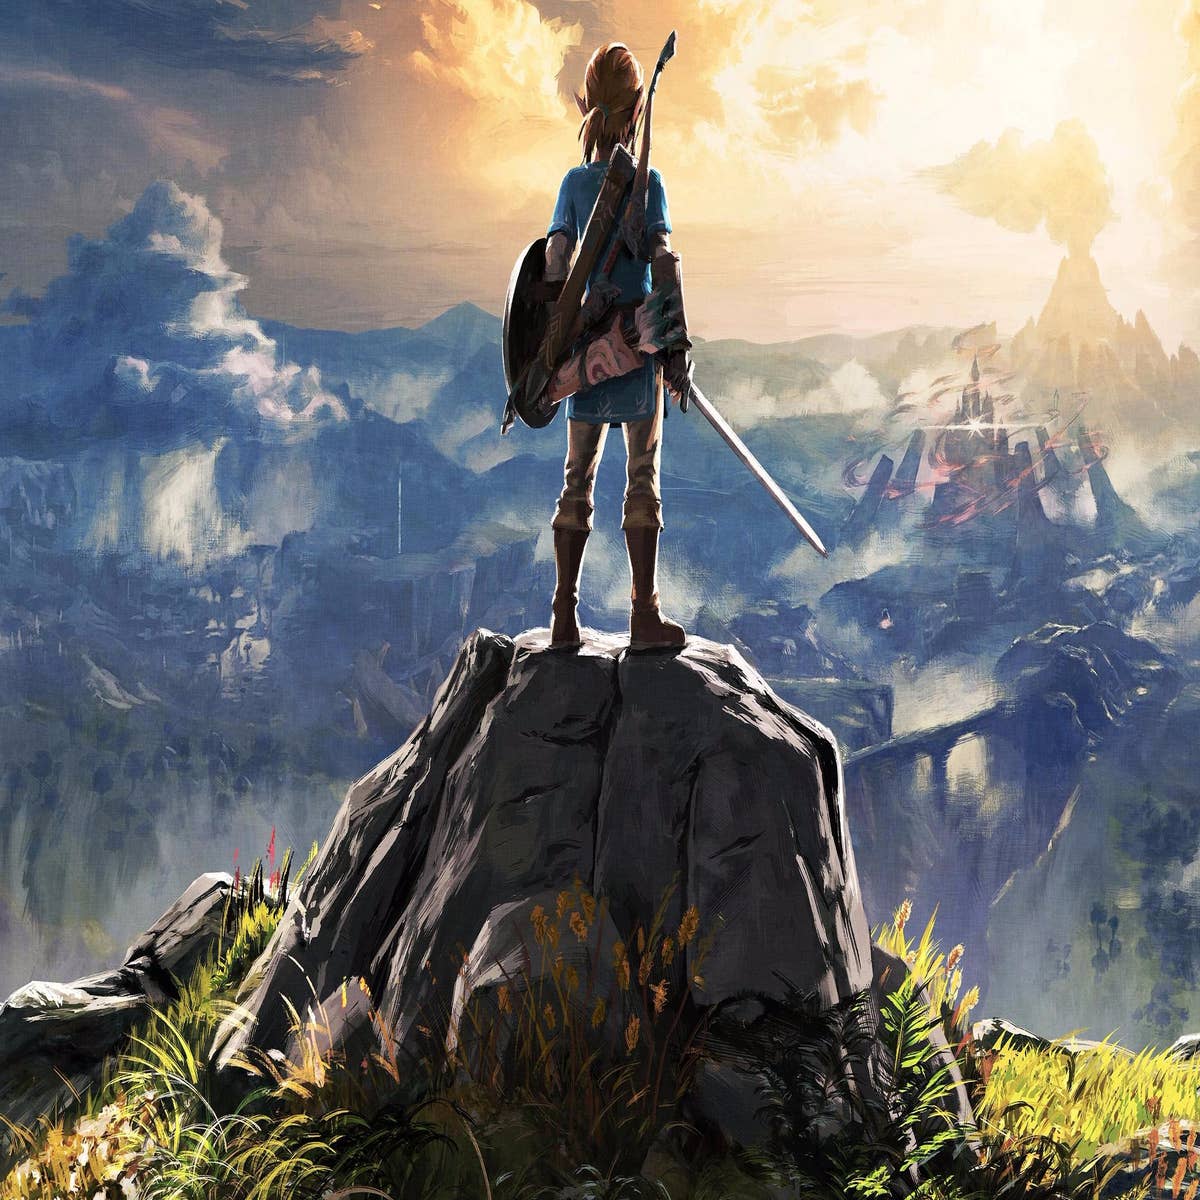 The Making Of The Legend Of Zelda: Breath Of The Wild